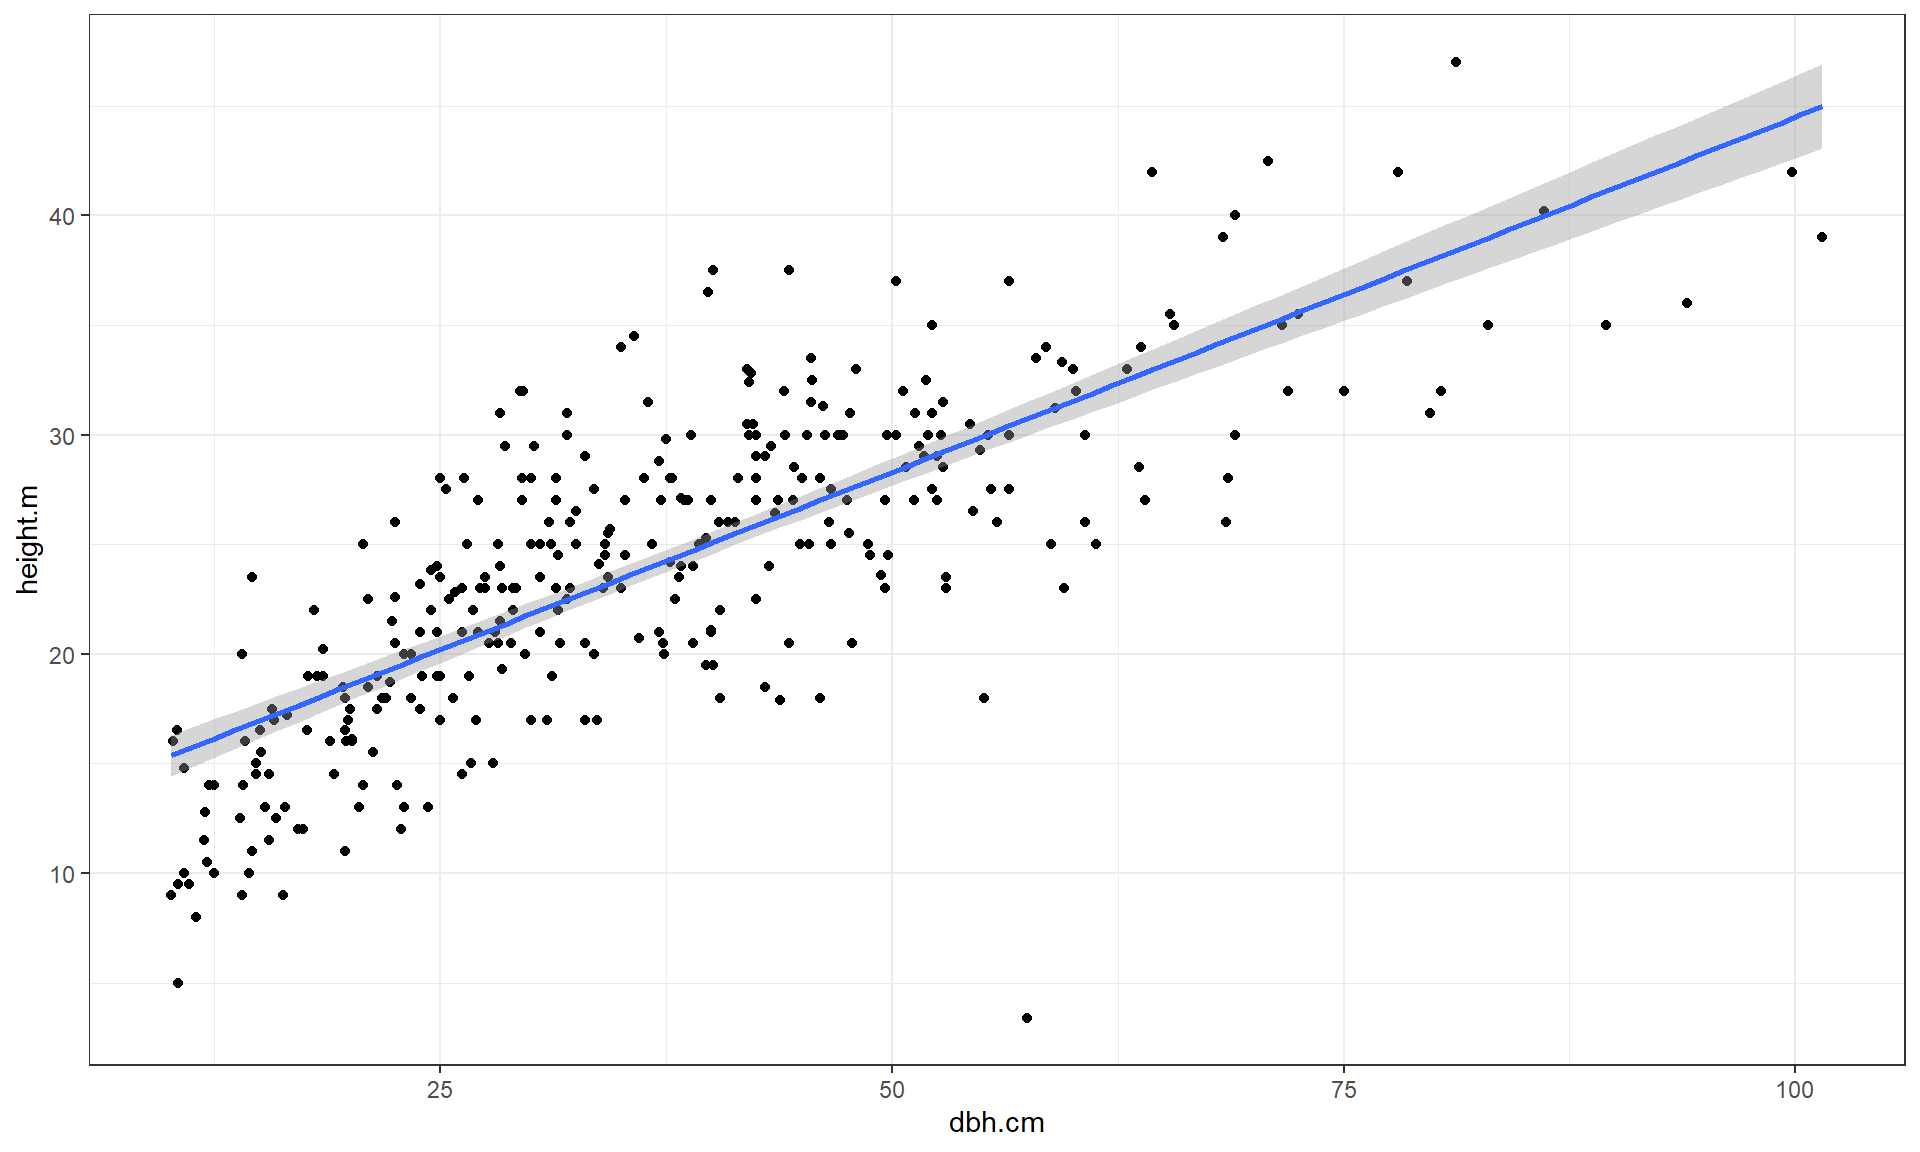 Scatterplot of tree heights (m) vs tree diameters (cm) with estimated straight line relationship (blue line) and 95% confidence interval (grey band).